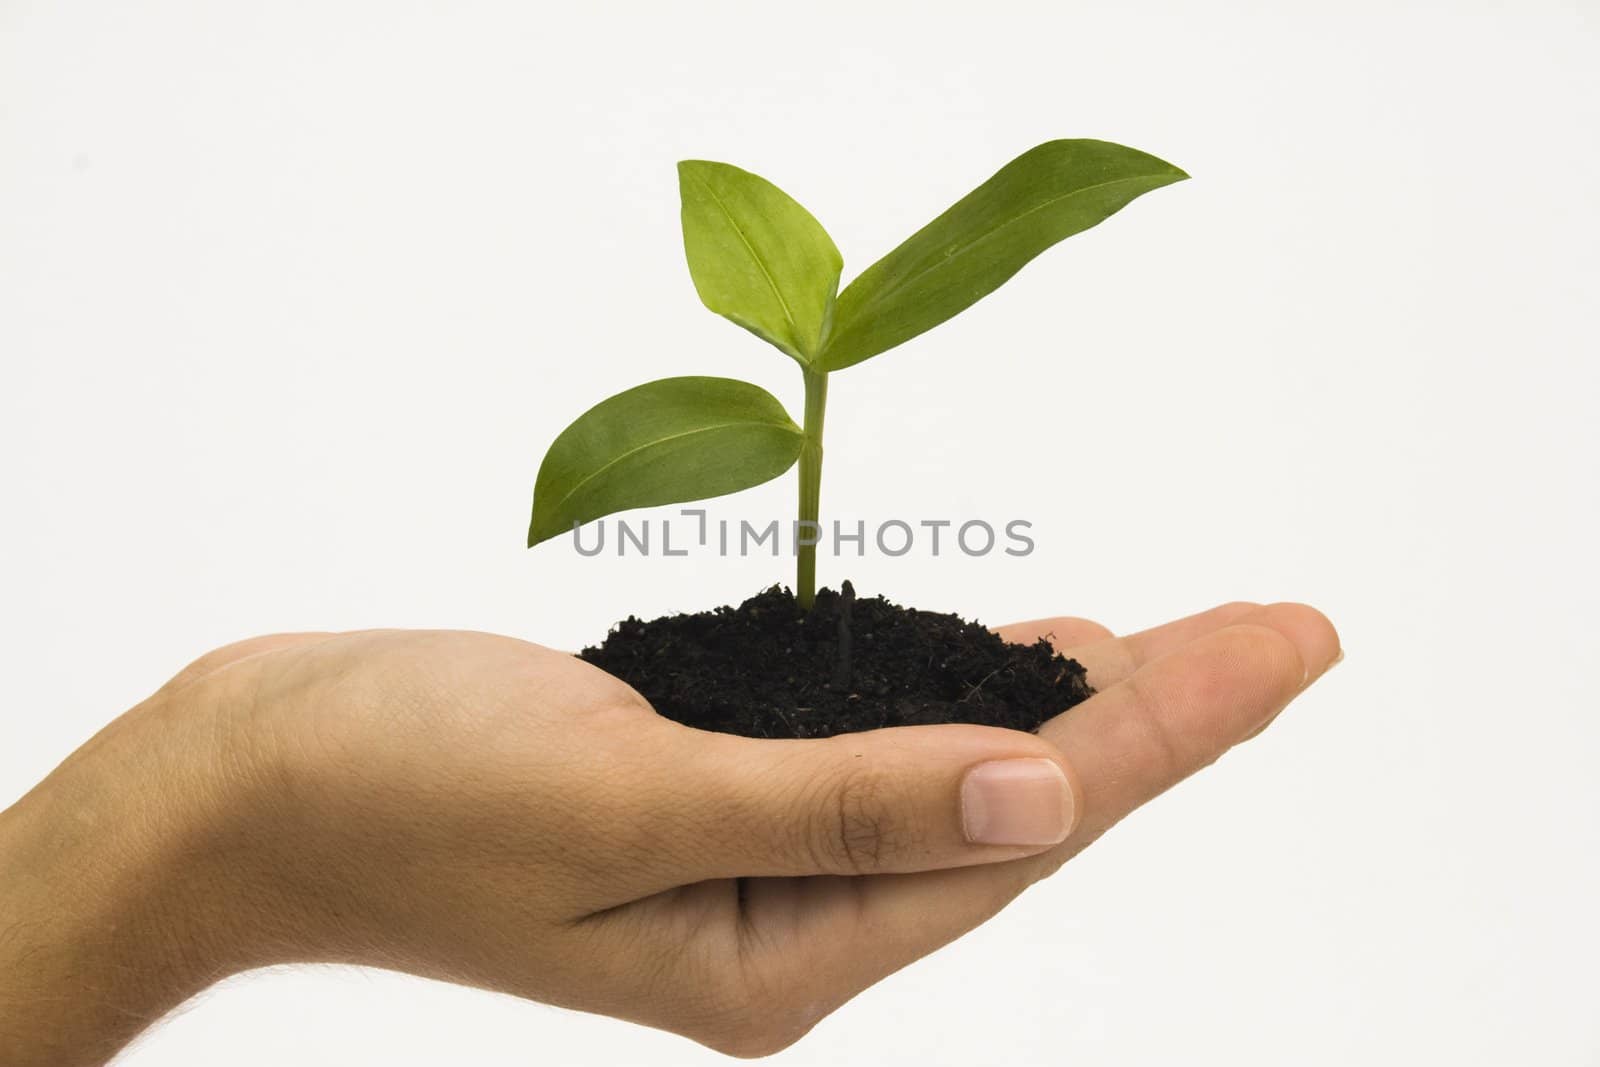 Hand holding young plant against white background